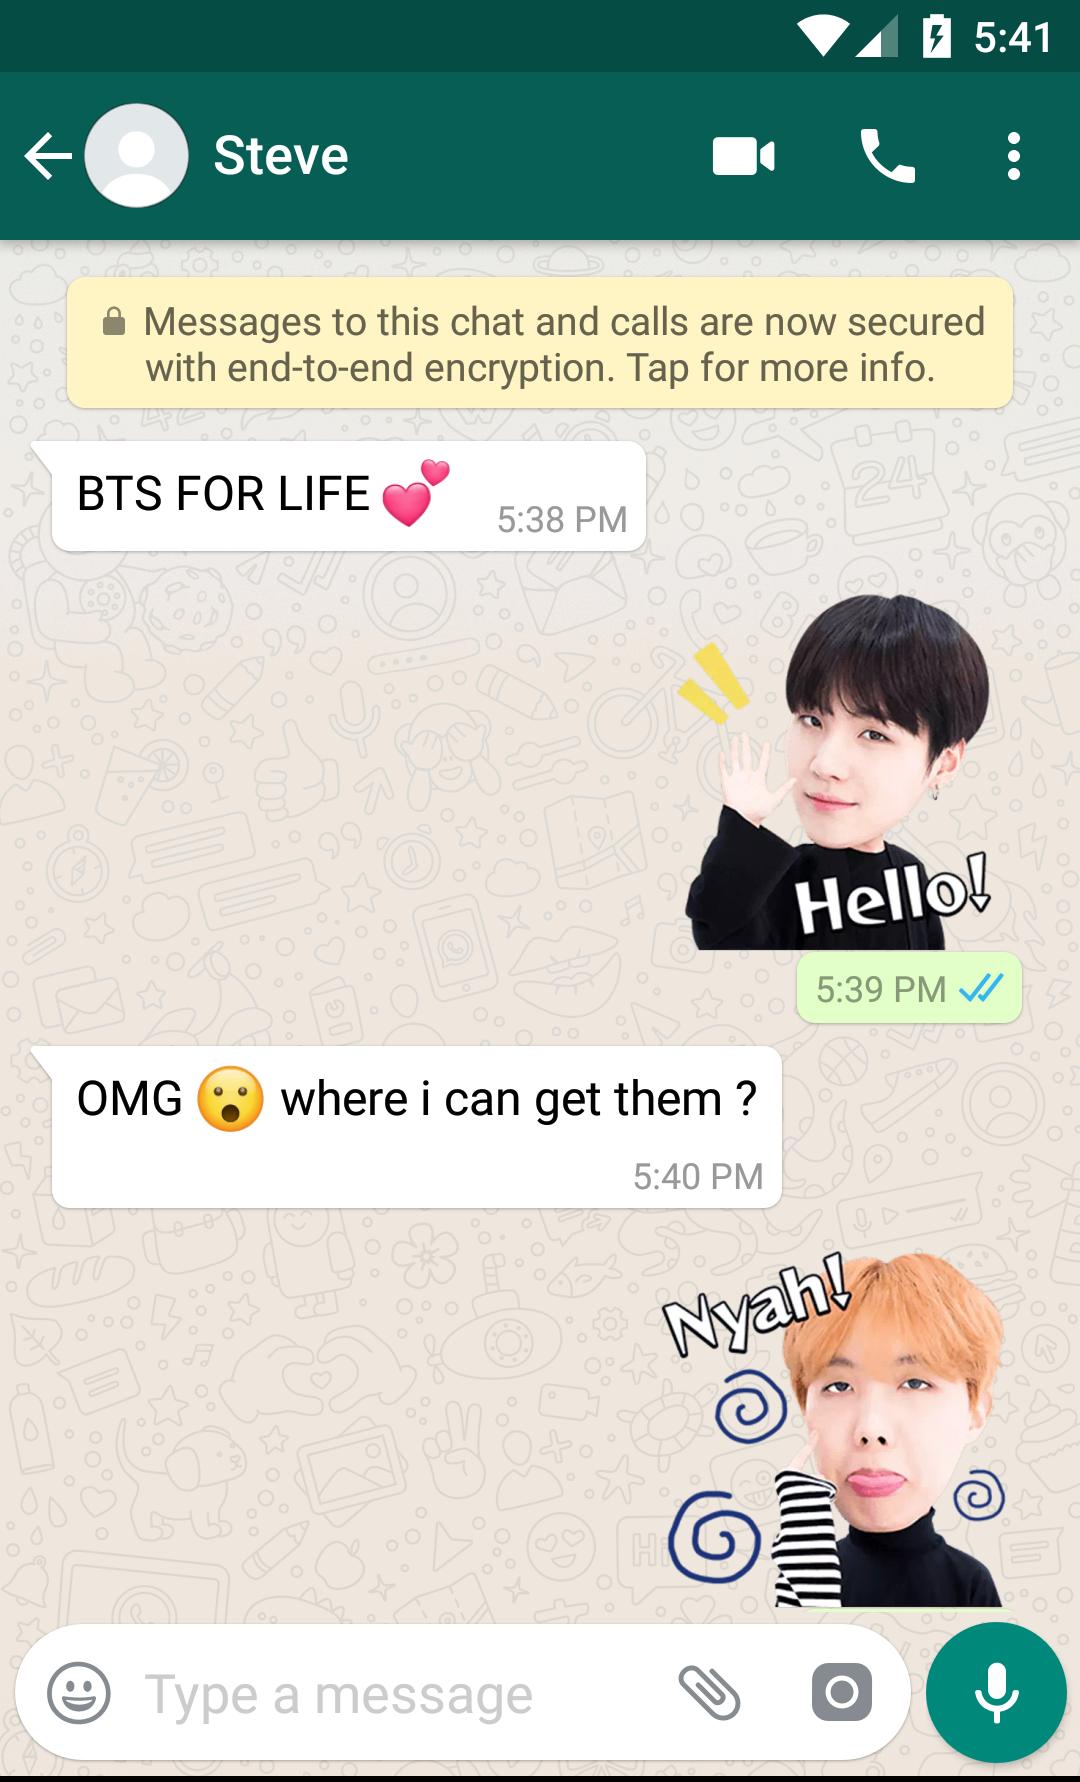 Bts Stickers For Whatsapp For Android Apk Download